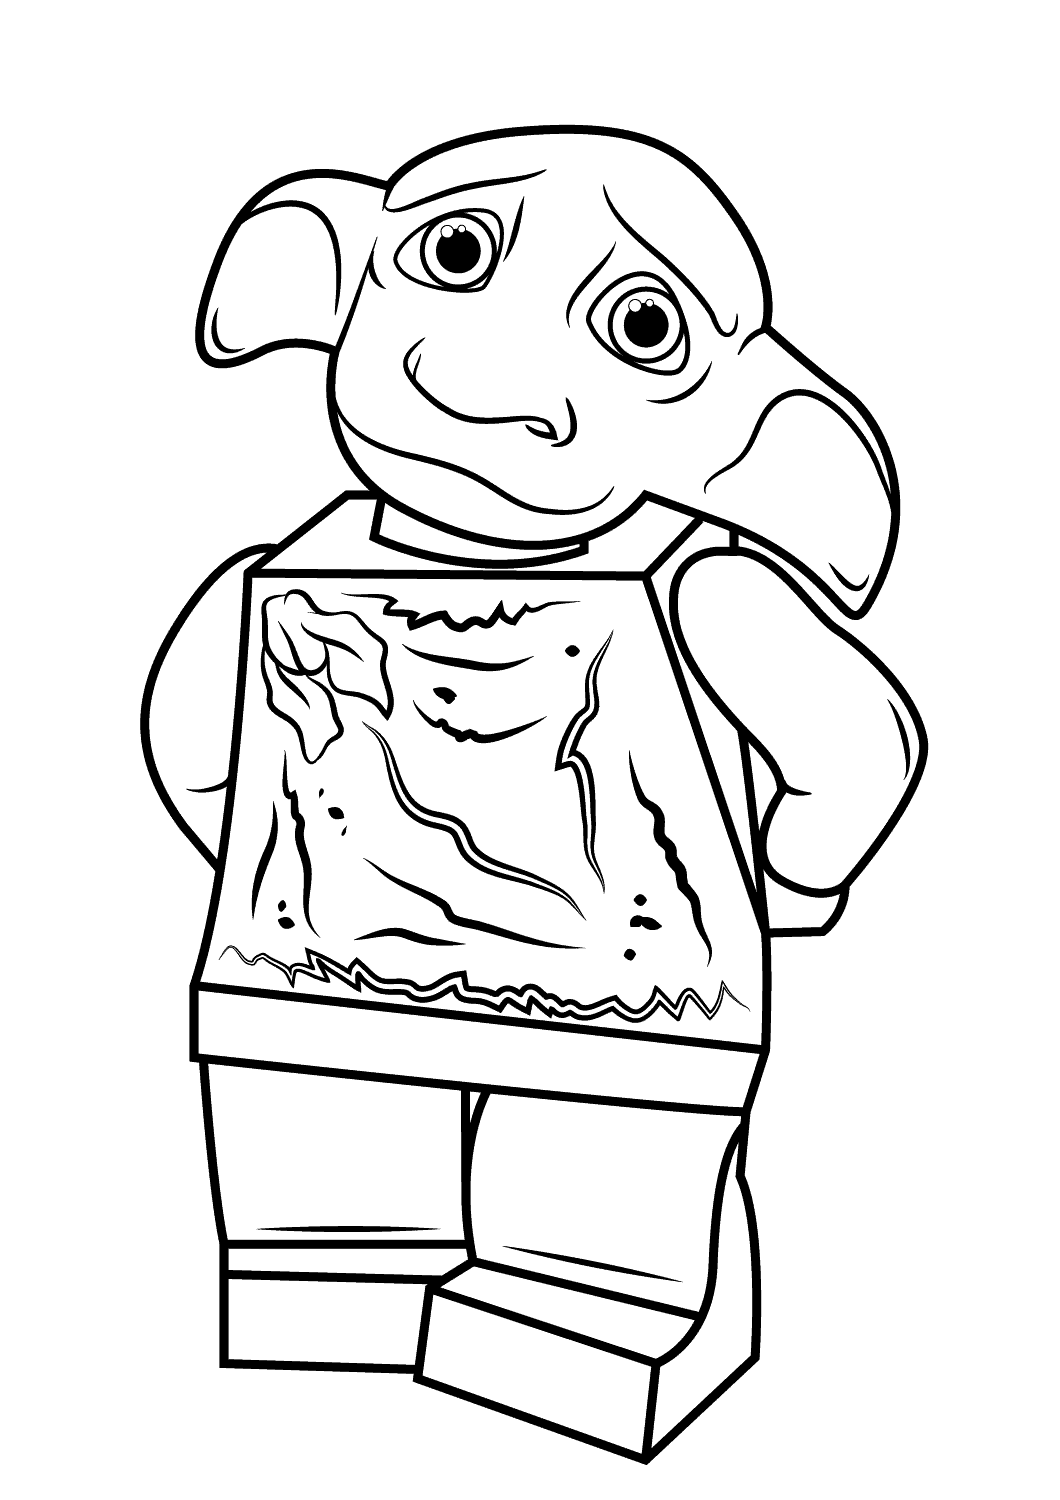 Lego Dobby Harry Potter Coloring Page